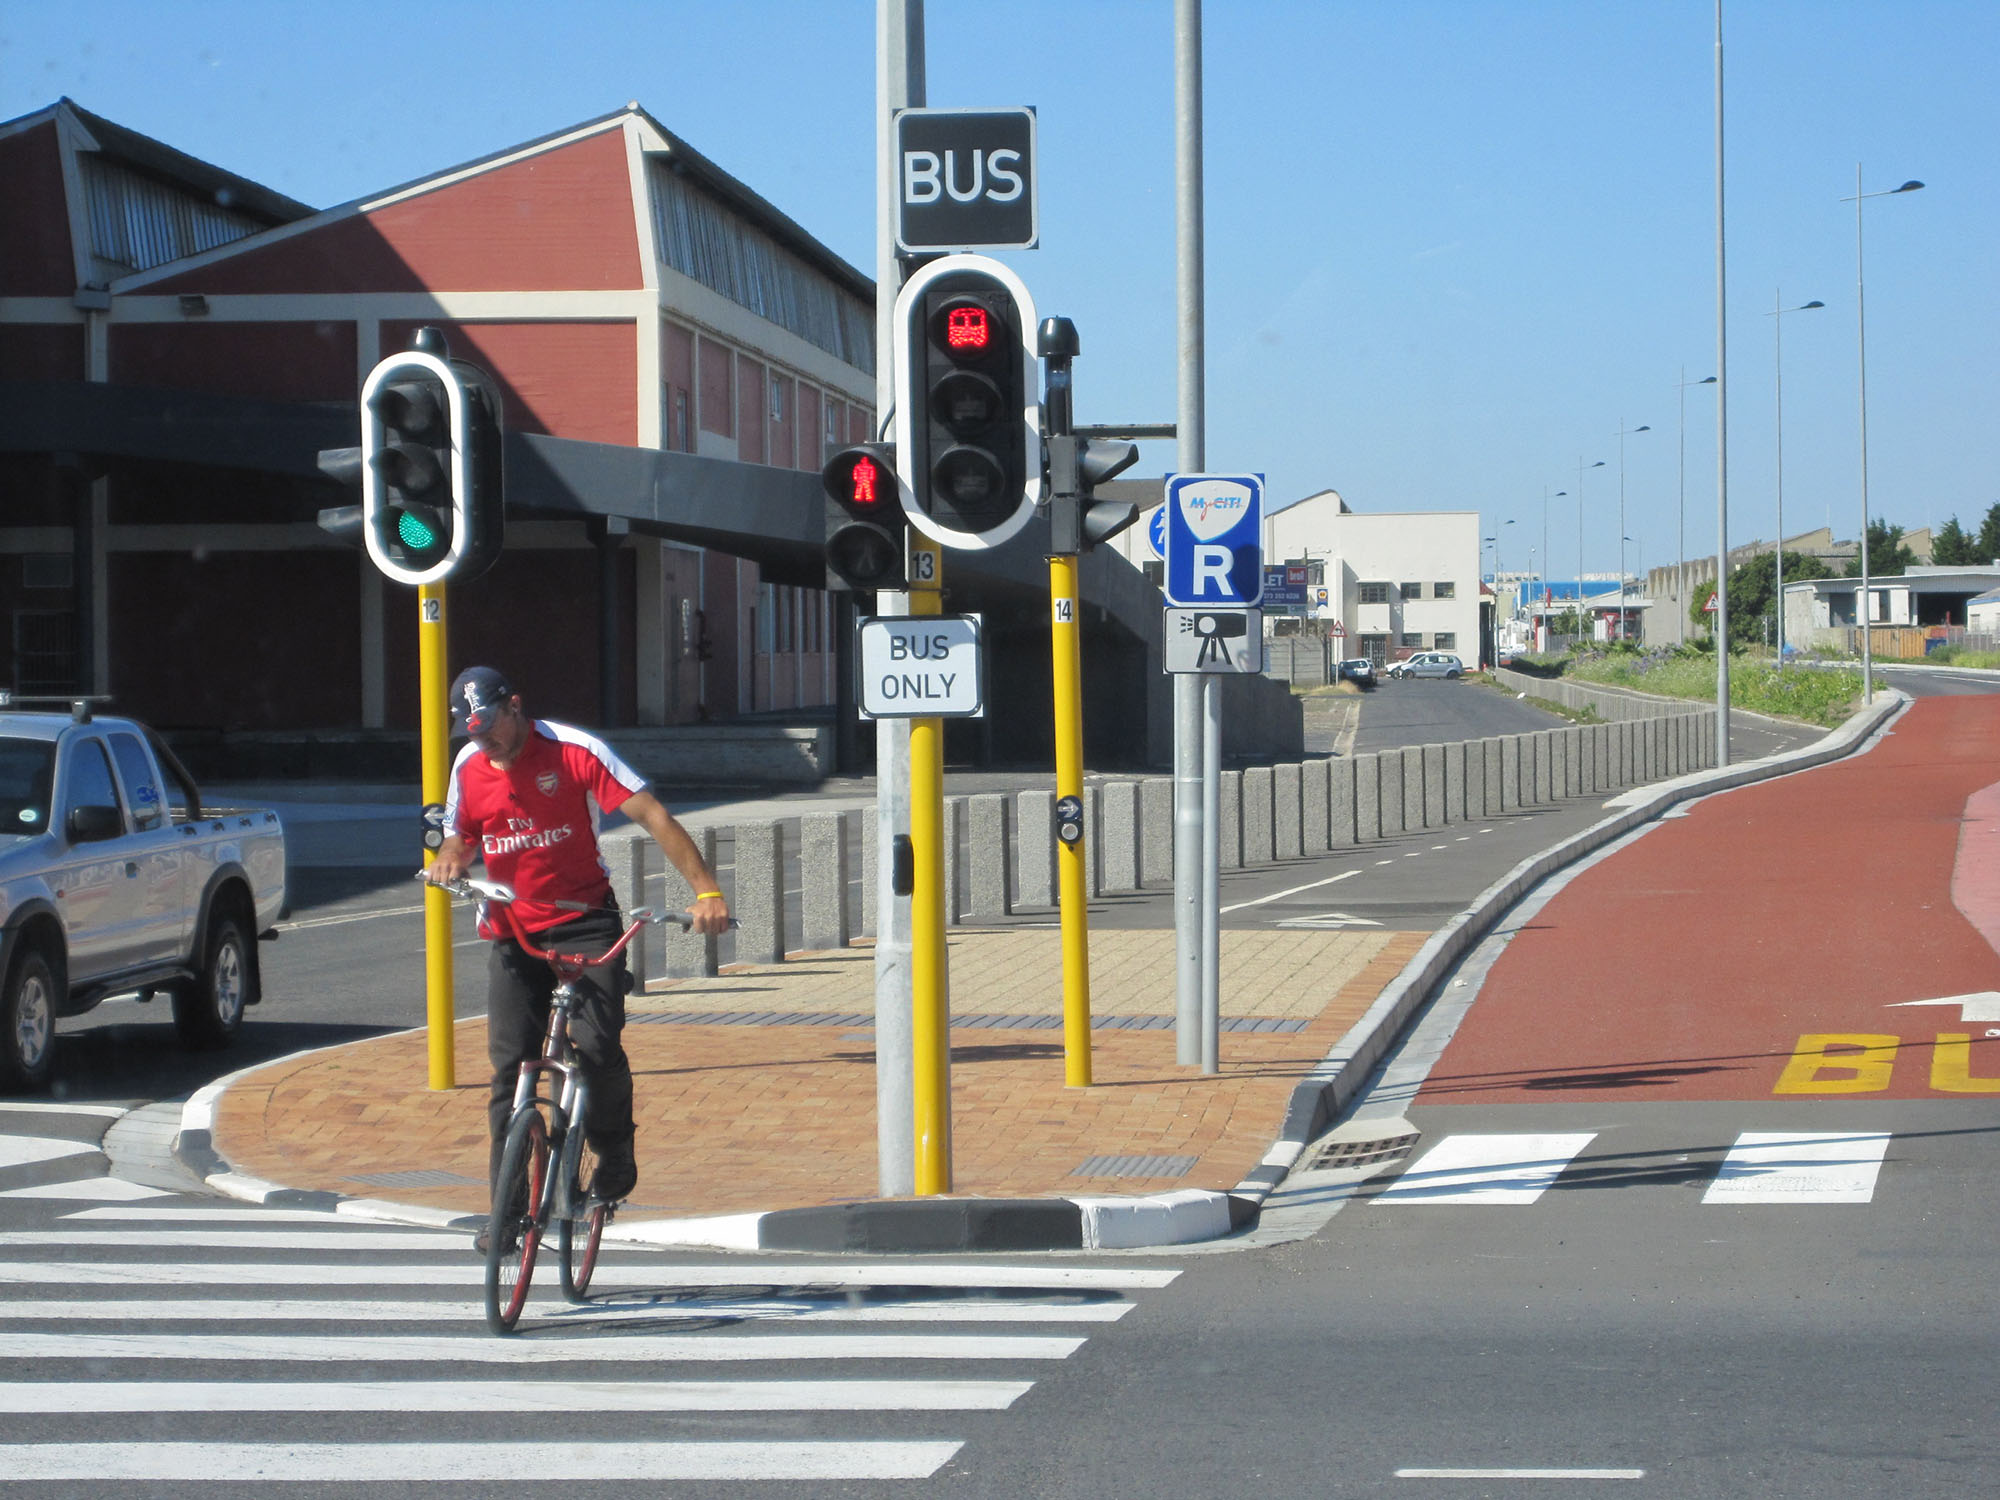 Fig. 23.18 In Cape Town, South Africa, the separator between the busway and the mixed-traffic vehicles acts as a two-way bike lane and an island for pedestrians.